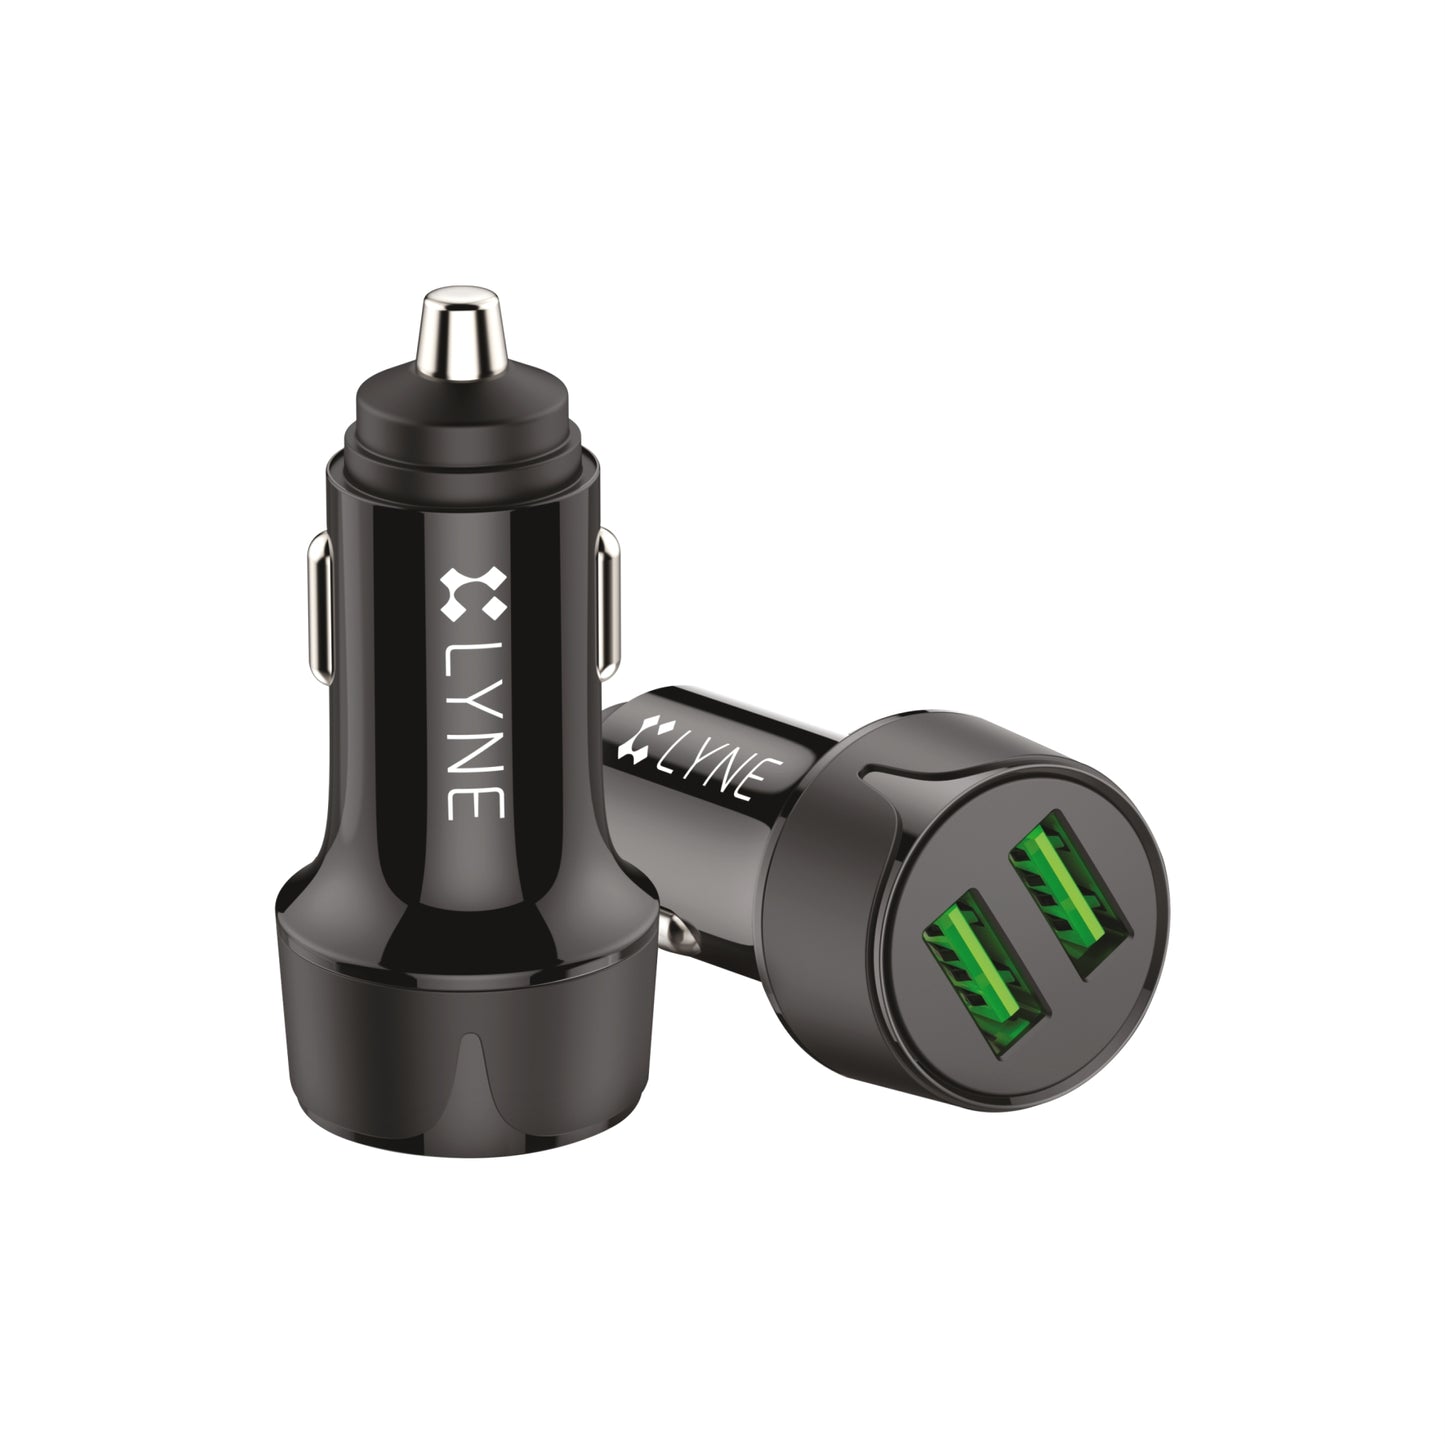 LYNE Piston 2 Dual USB Port, 3.1 Amp Output Car Charger with Micro USB Cable